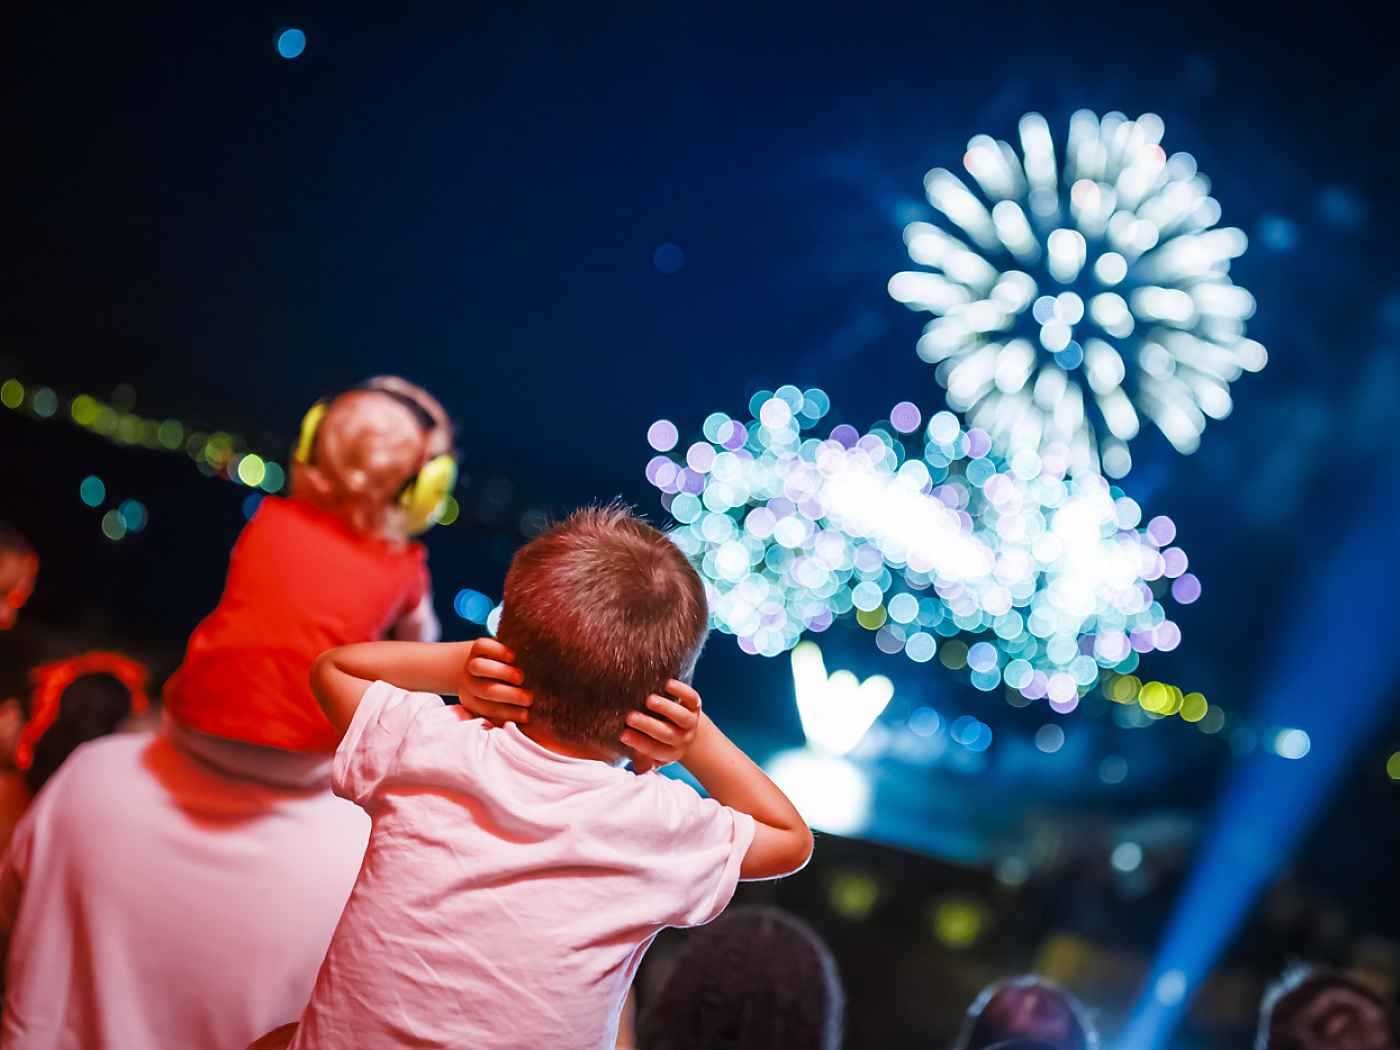 Survey: For every second person, fireworks are part of the national holiday